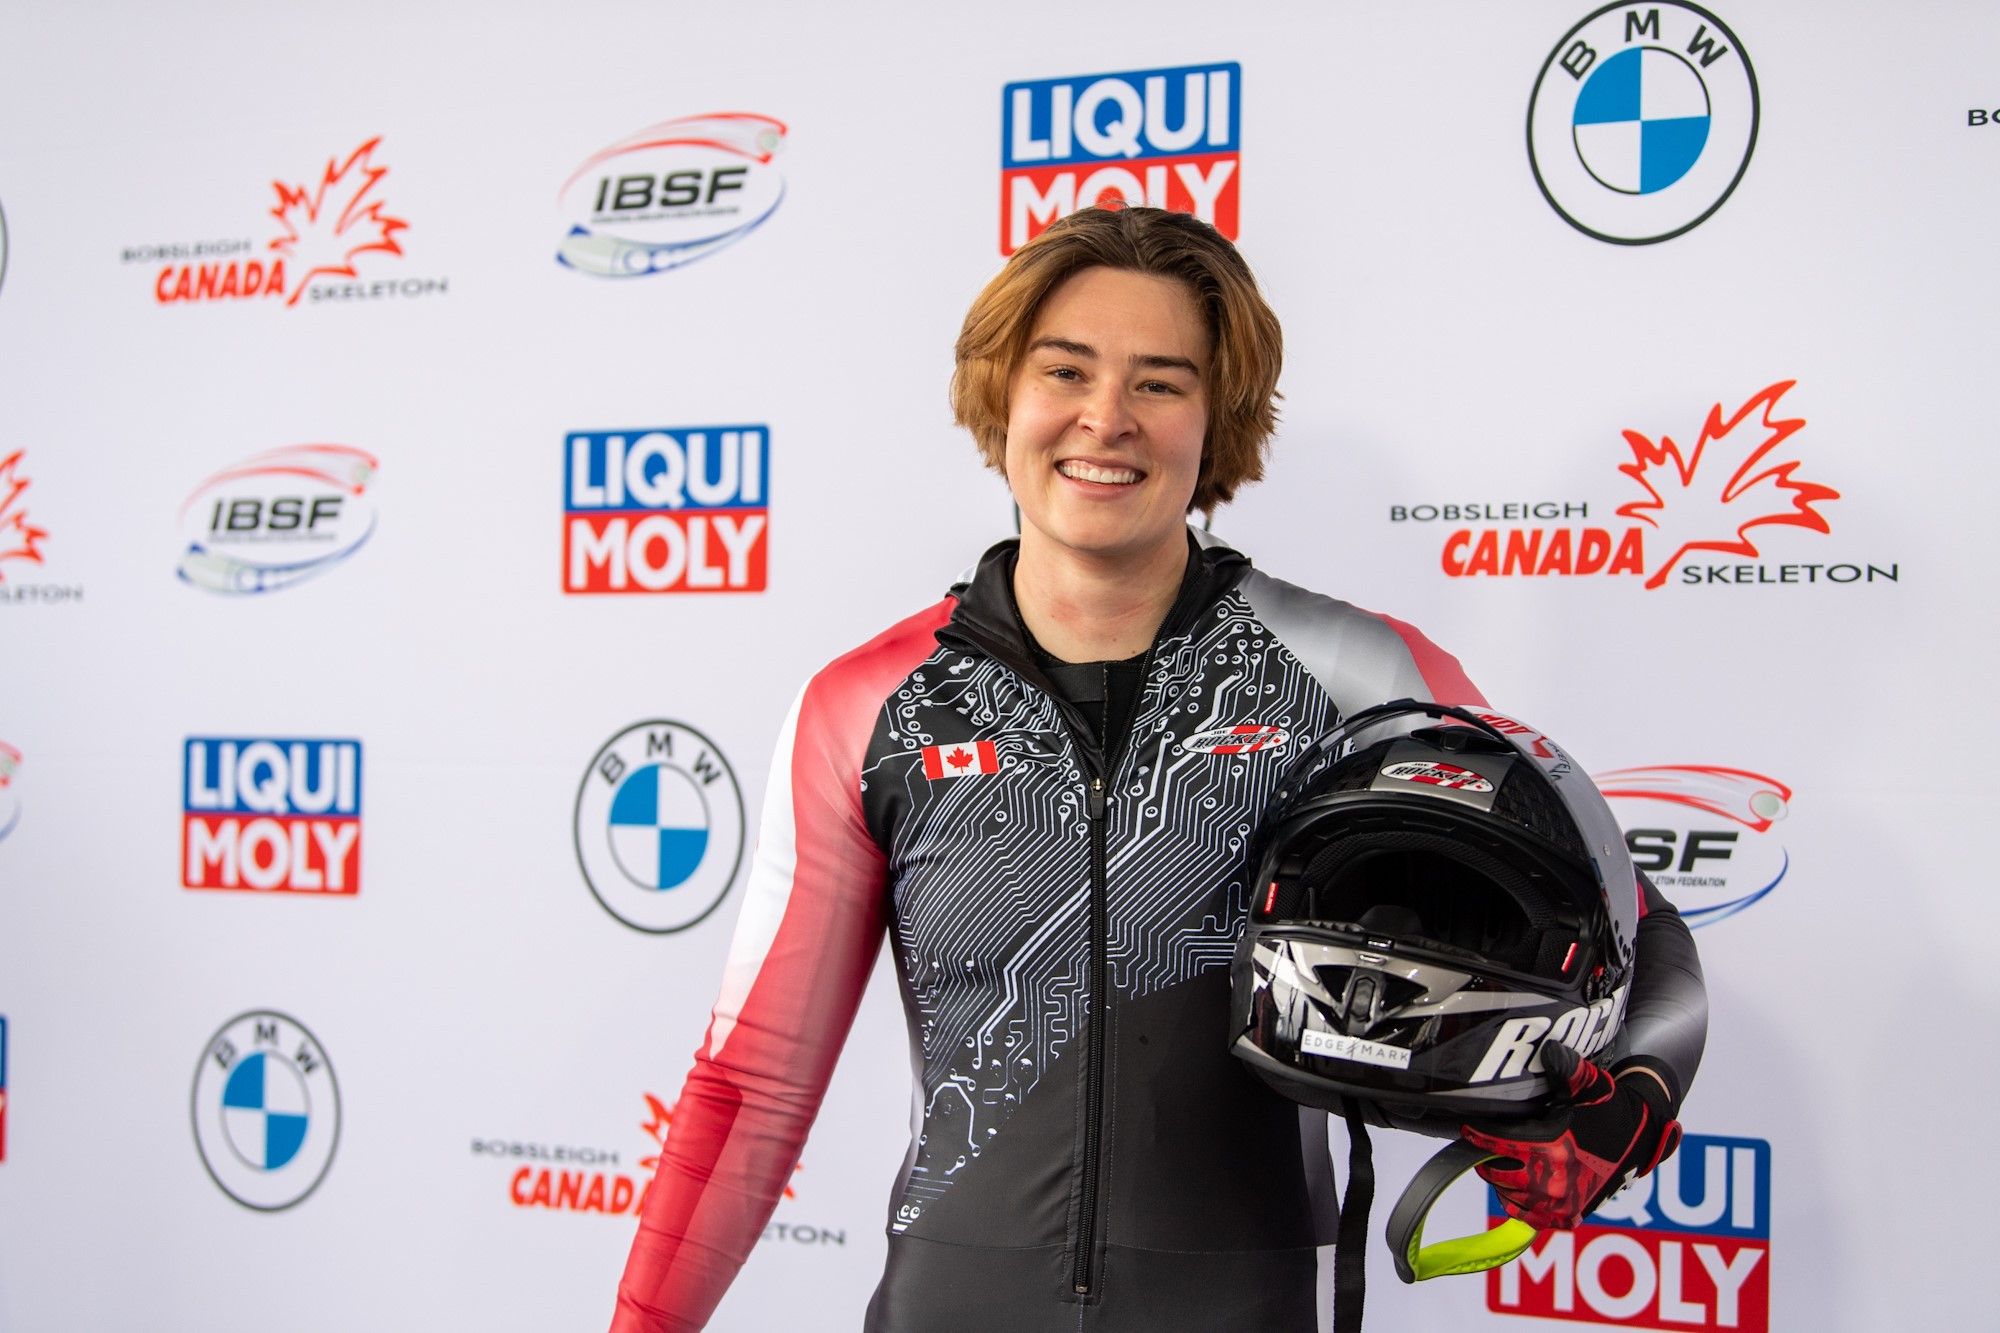 Bianca Ribi finished first in the women's monobob event in Whistler ©IBSF